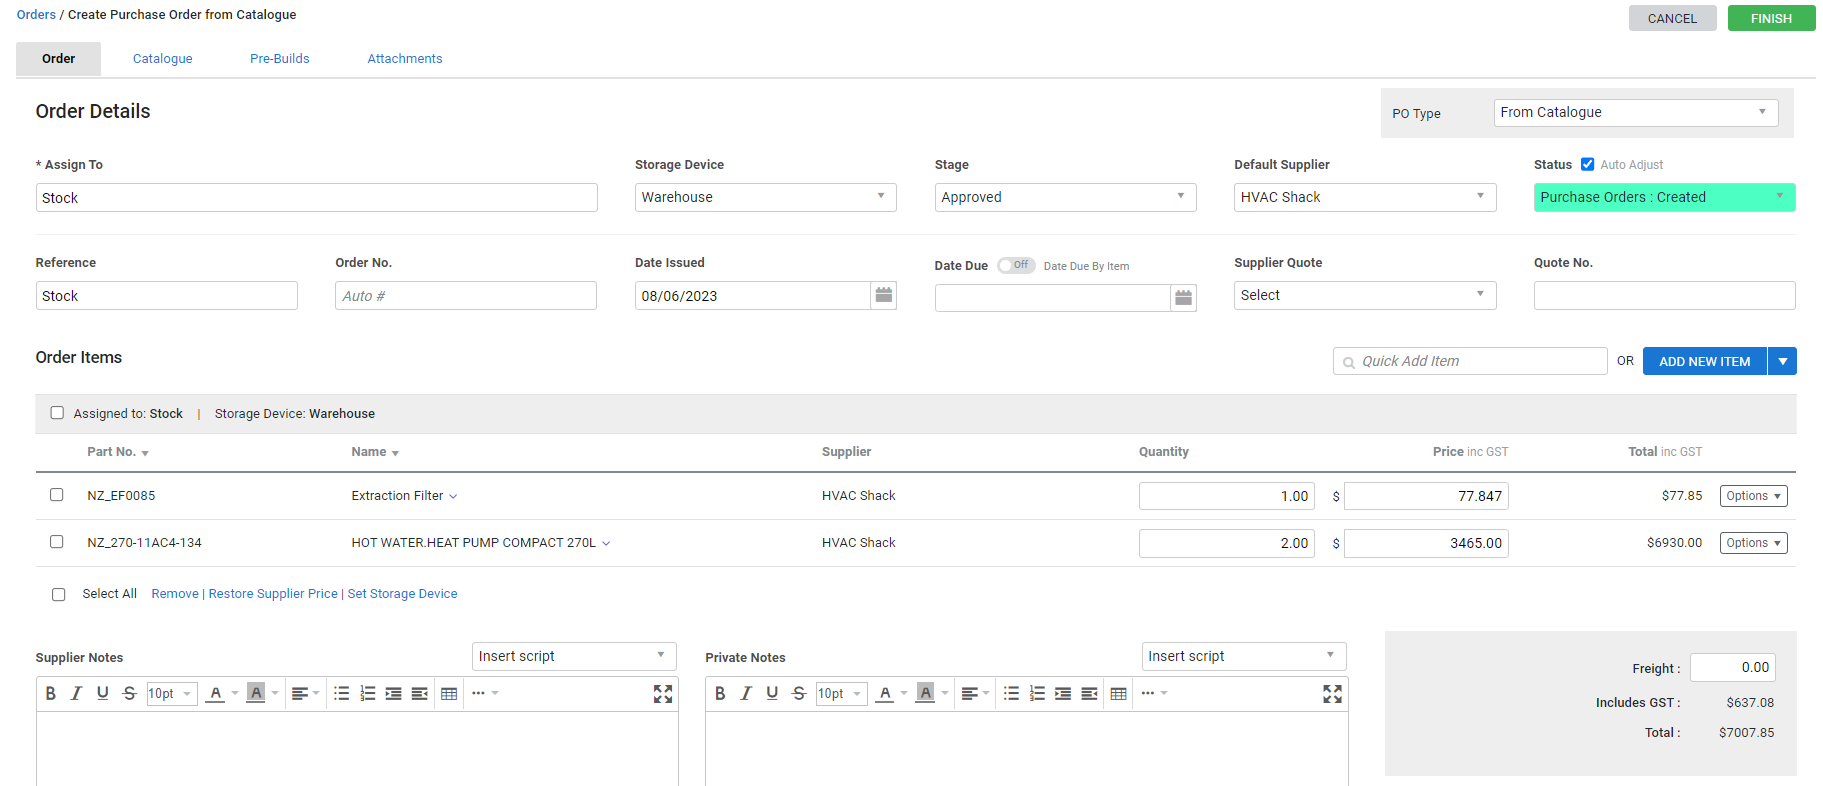 A screenshot of the options available below items in a purchase order.